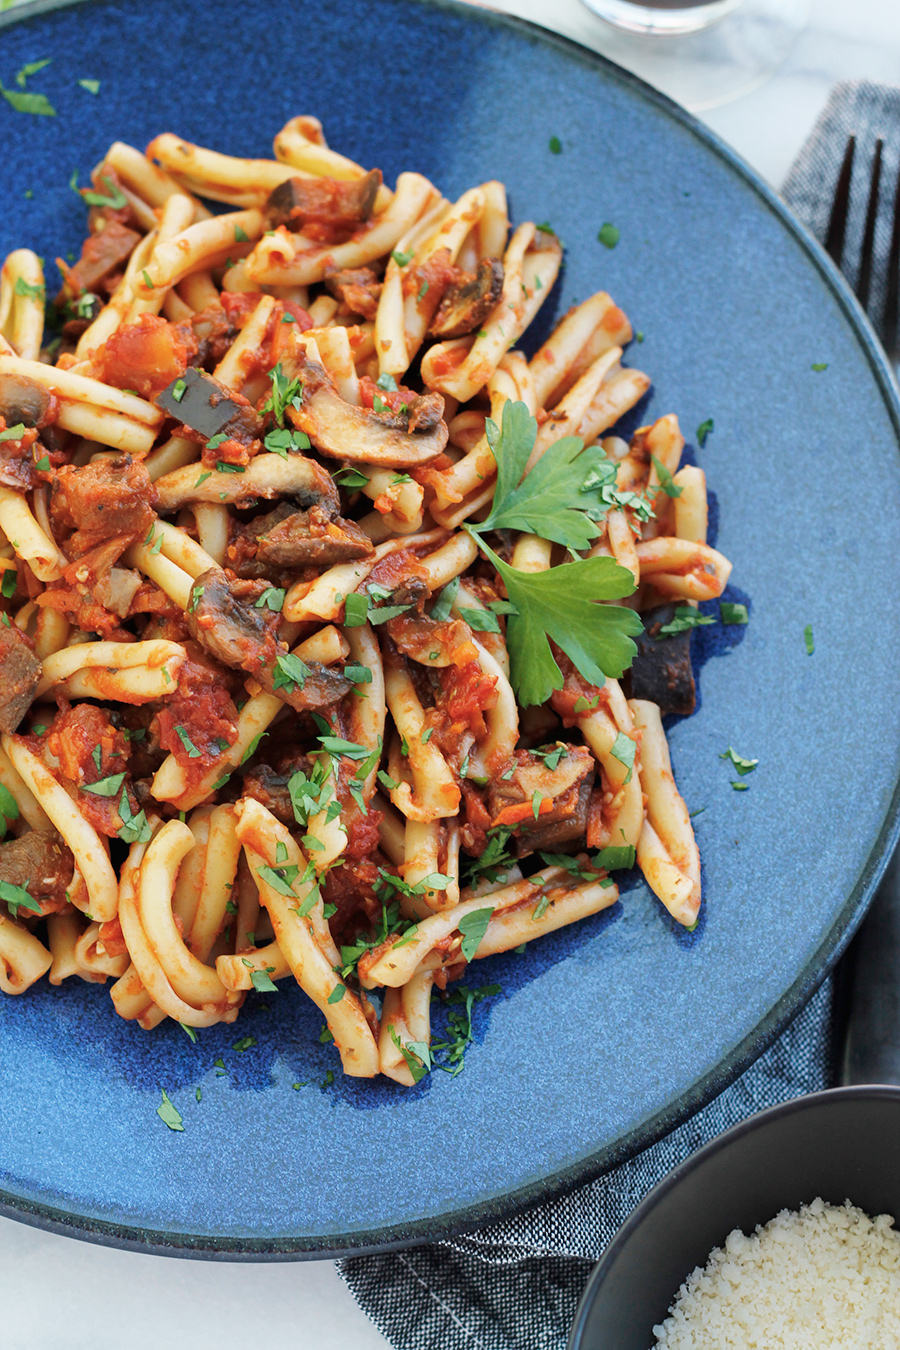 Blue plate filled with Vegan Eggplant Mushroom Bolognese Sauce tossed with Casarecce pasta.